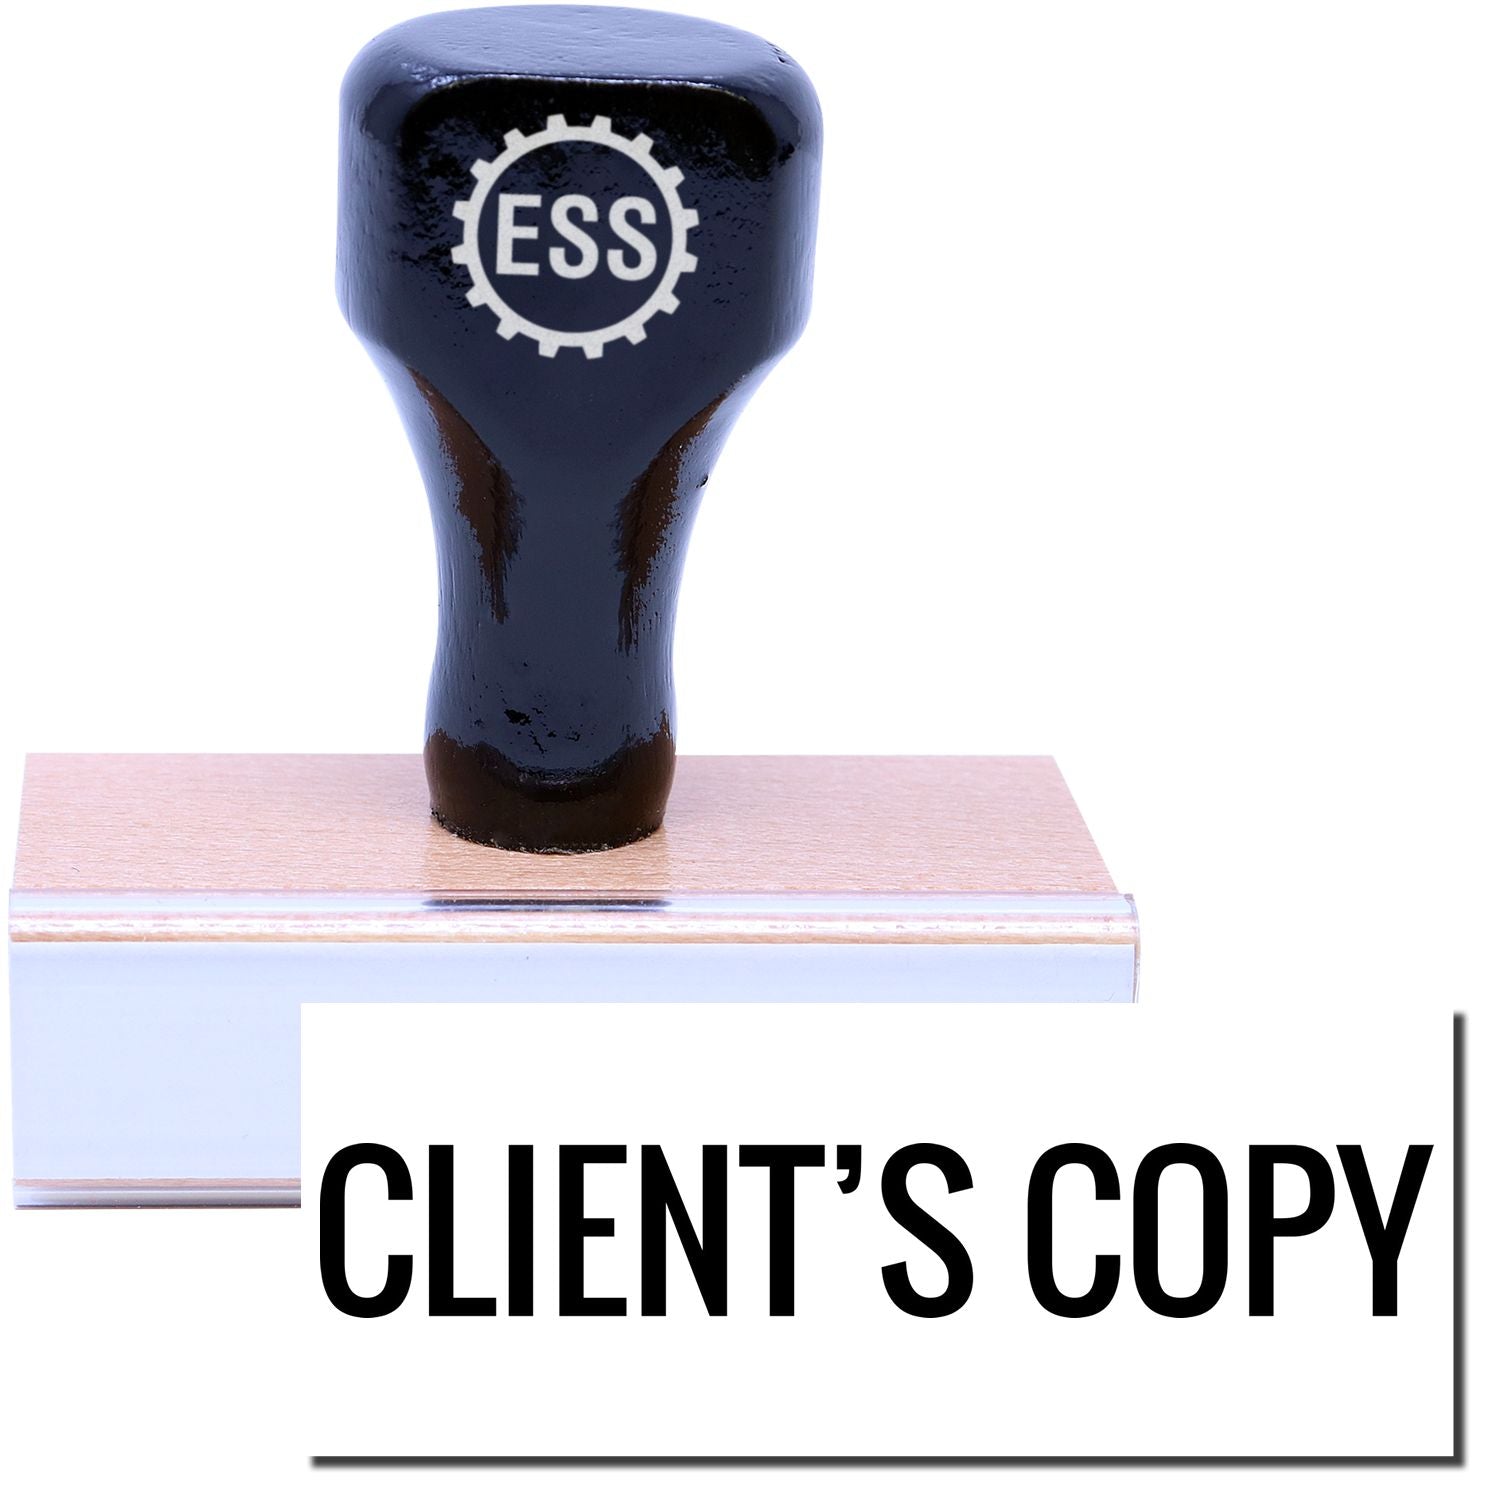 A stock office rubber stamp with a stamped image showing how the text "CLIENT'S COPY" is displayed after stamping.